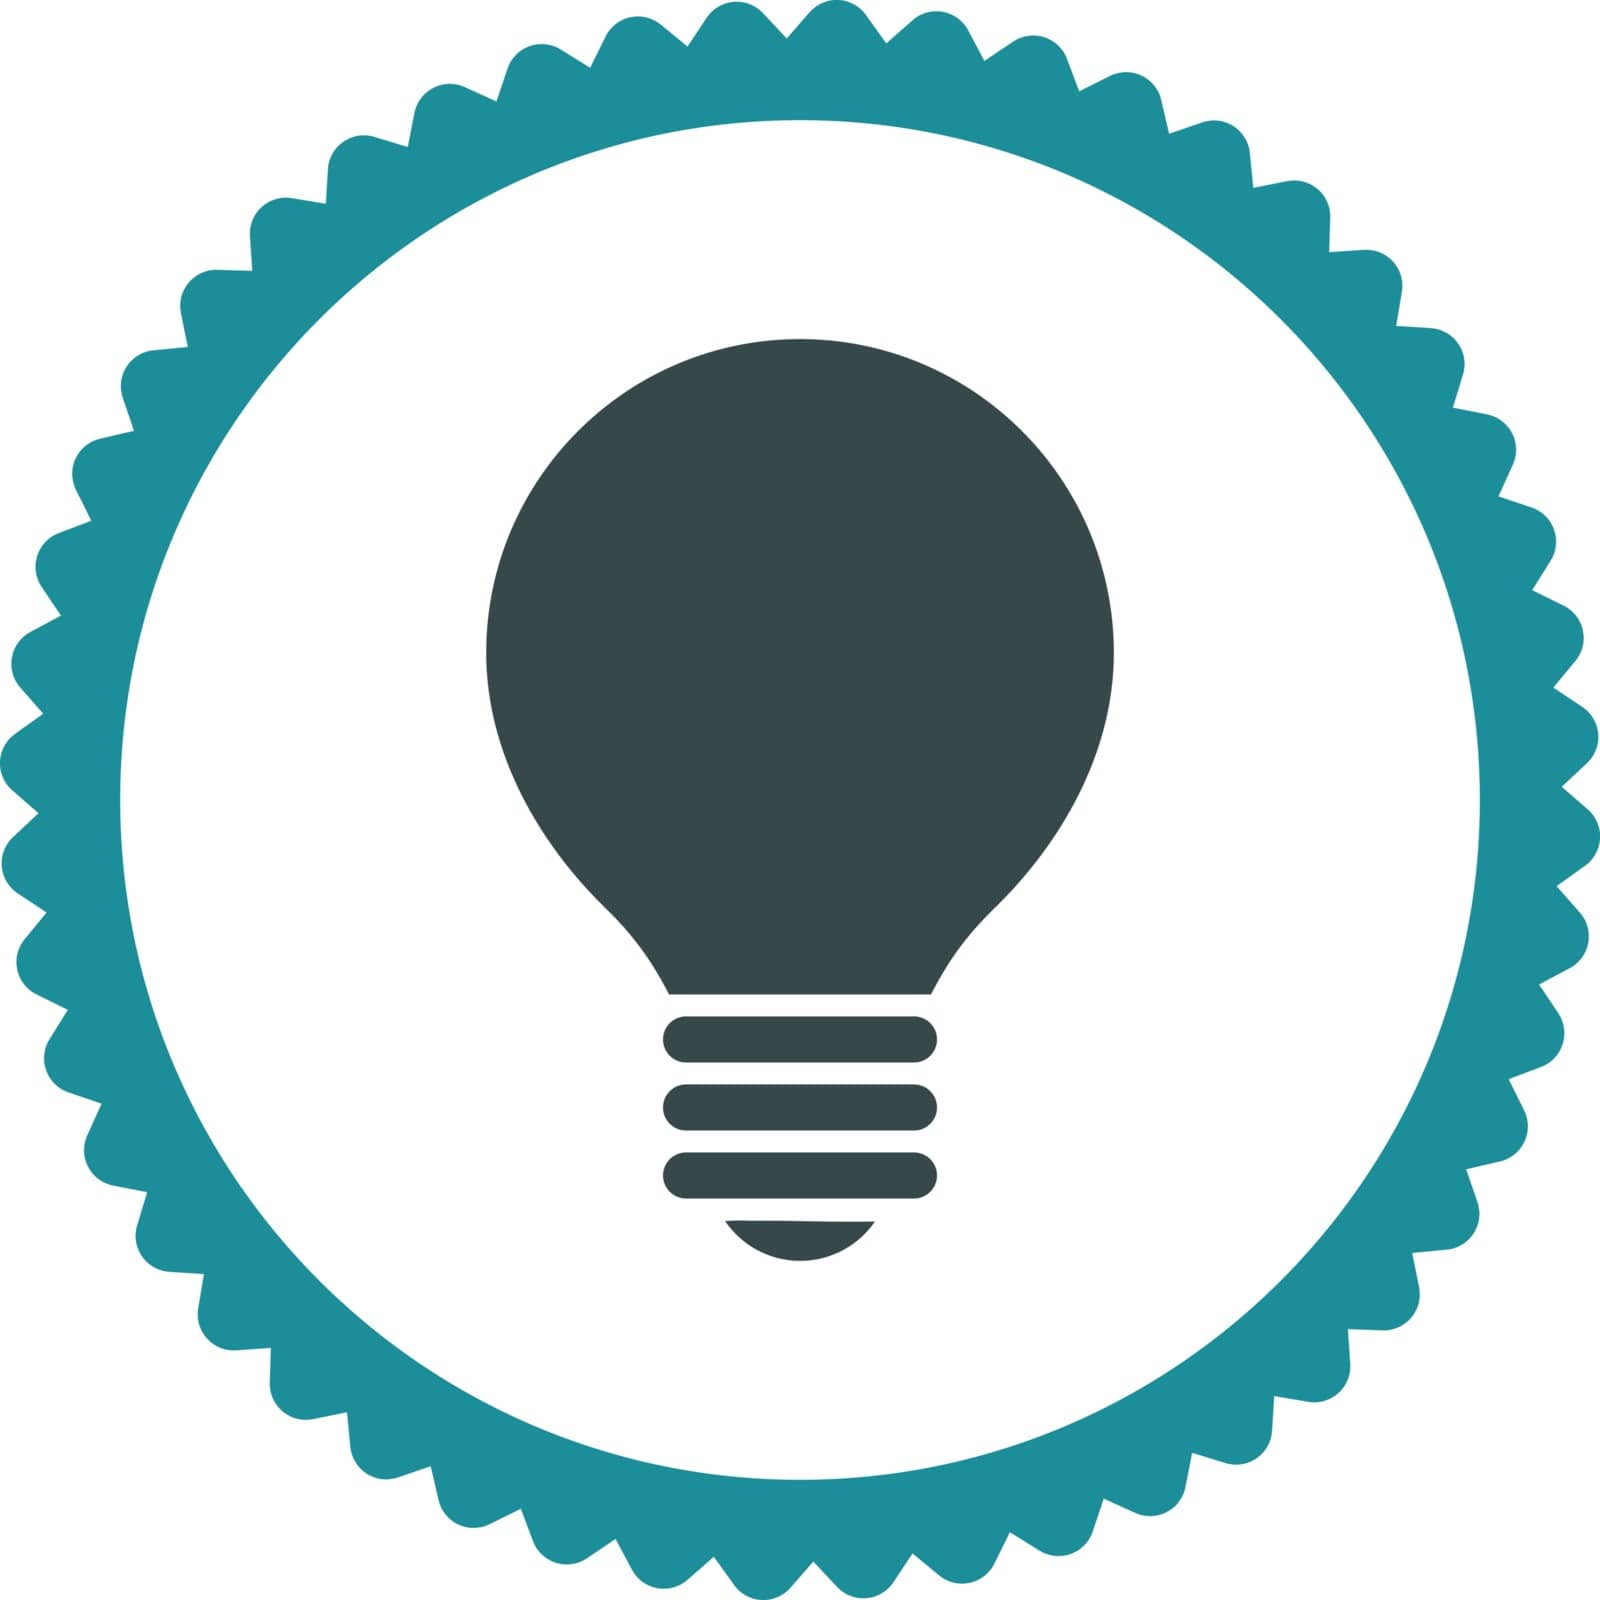 Electric Bulb round stamp icon. This flat vector symbol is drawn with soft blue colors on a white background.